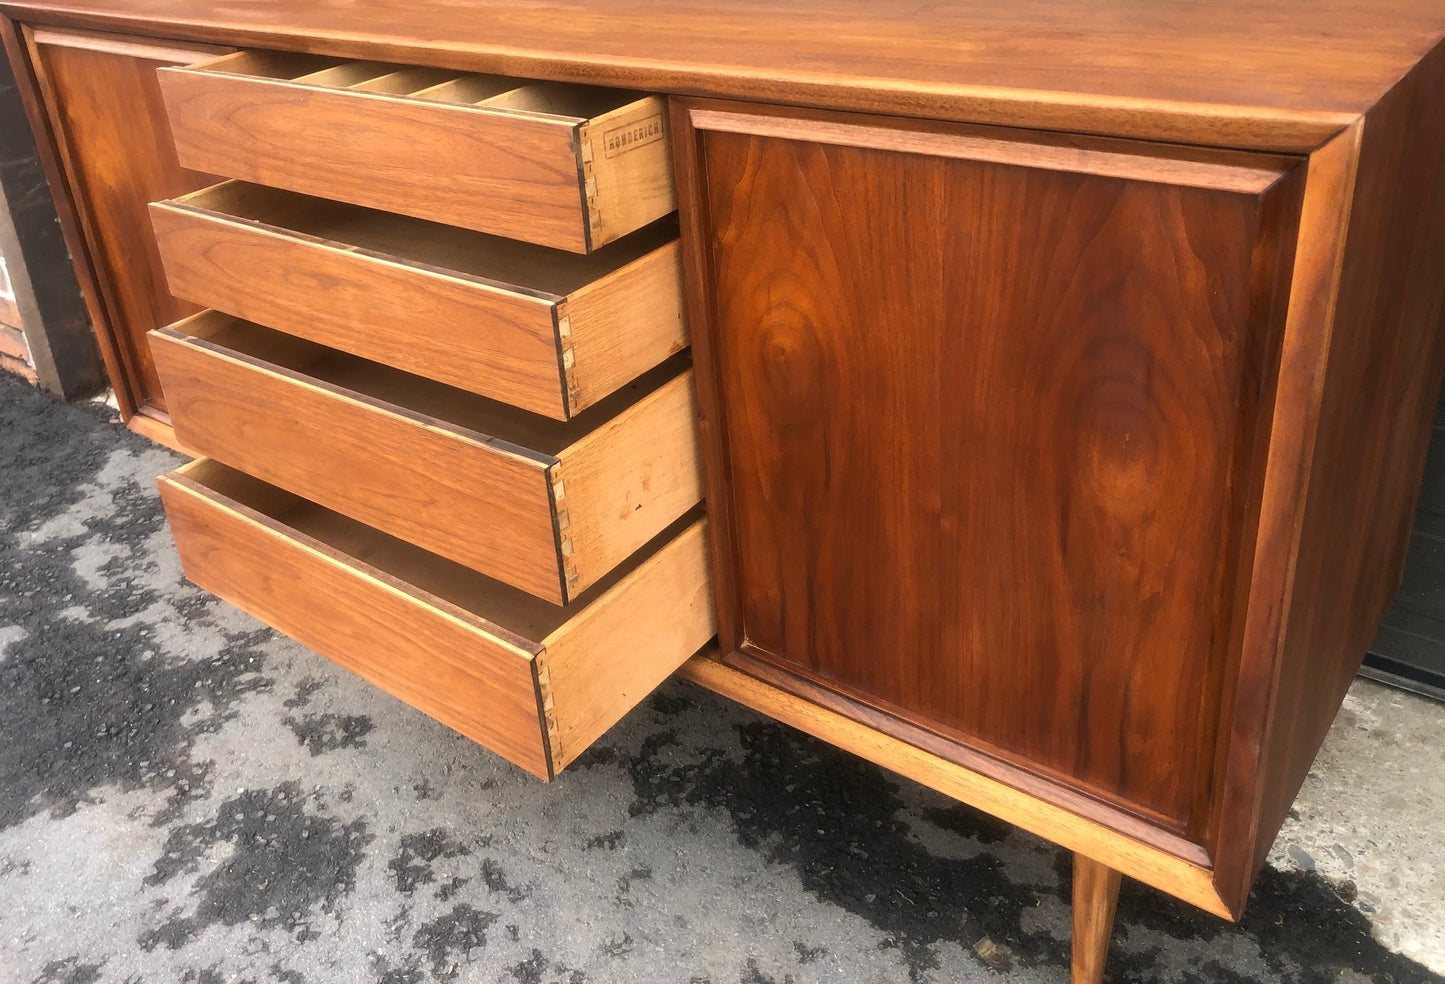 REFINISHED  MCM Walnut Sideboard Buffet 56.5" by Honderich , PERFECT